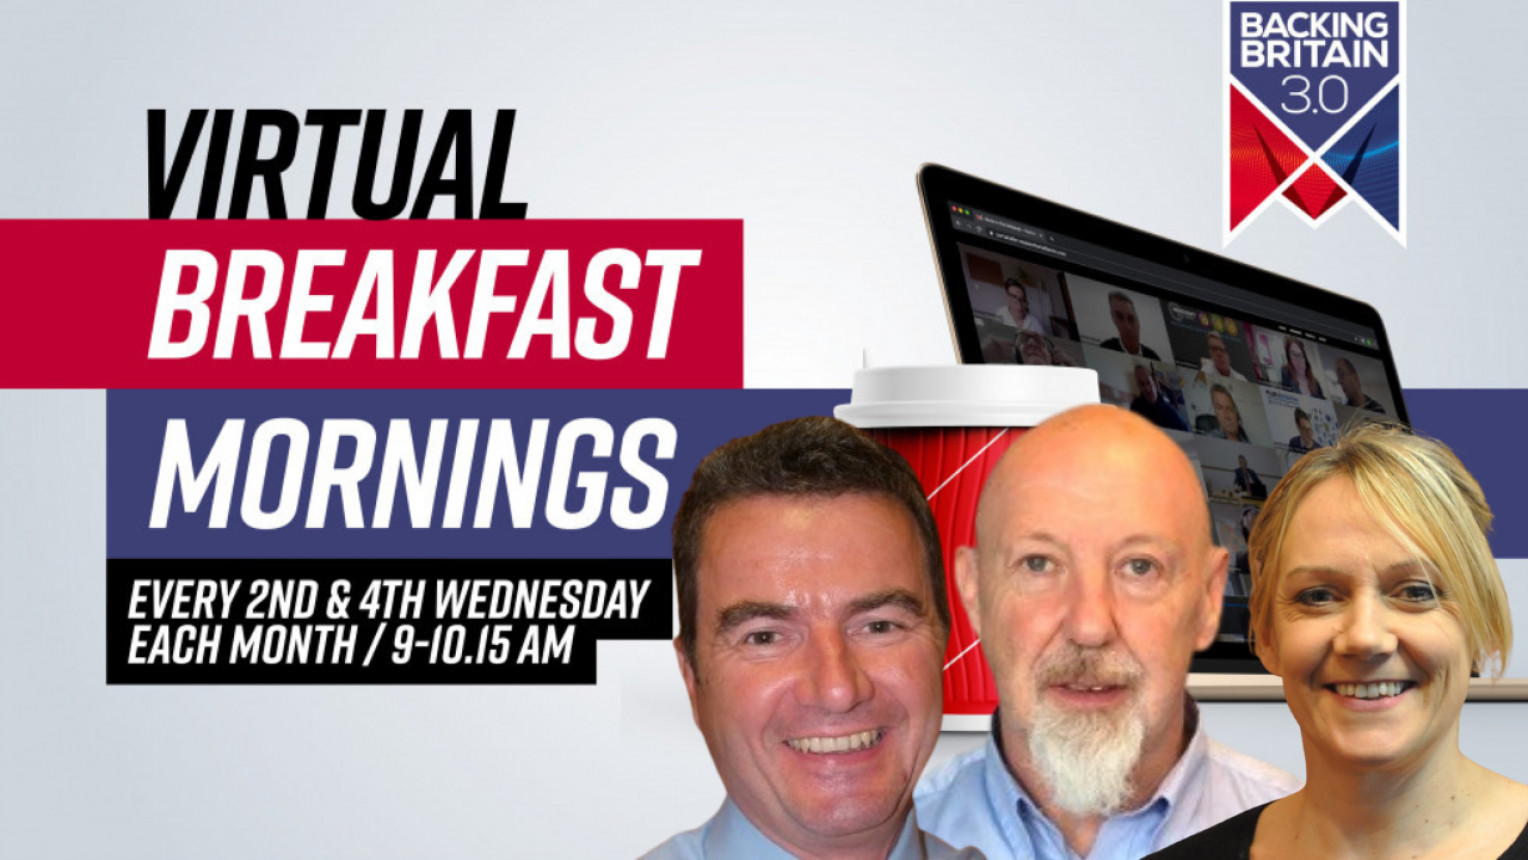 Backing Britain Virtual Breakfast Morning with Manufacturing Technology Centre (MTC), Pentangle Engineering and Additive X